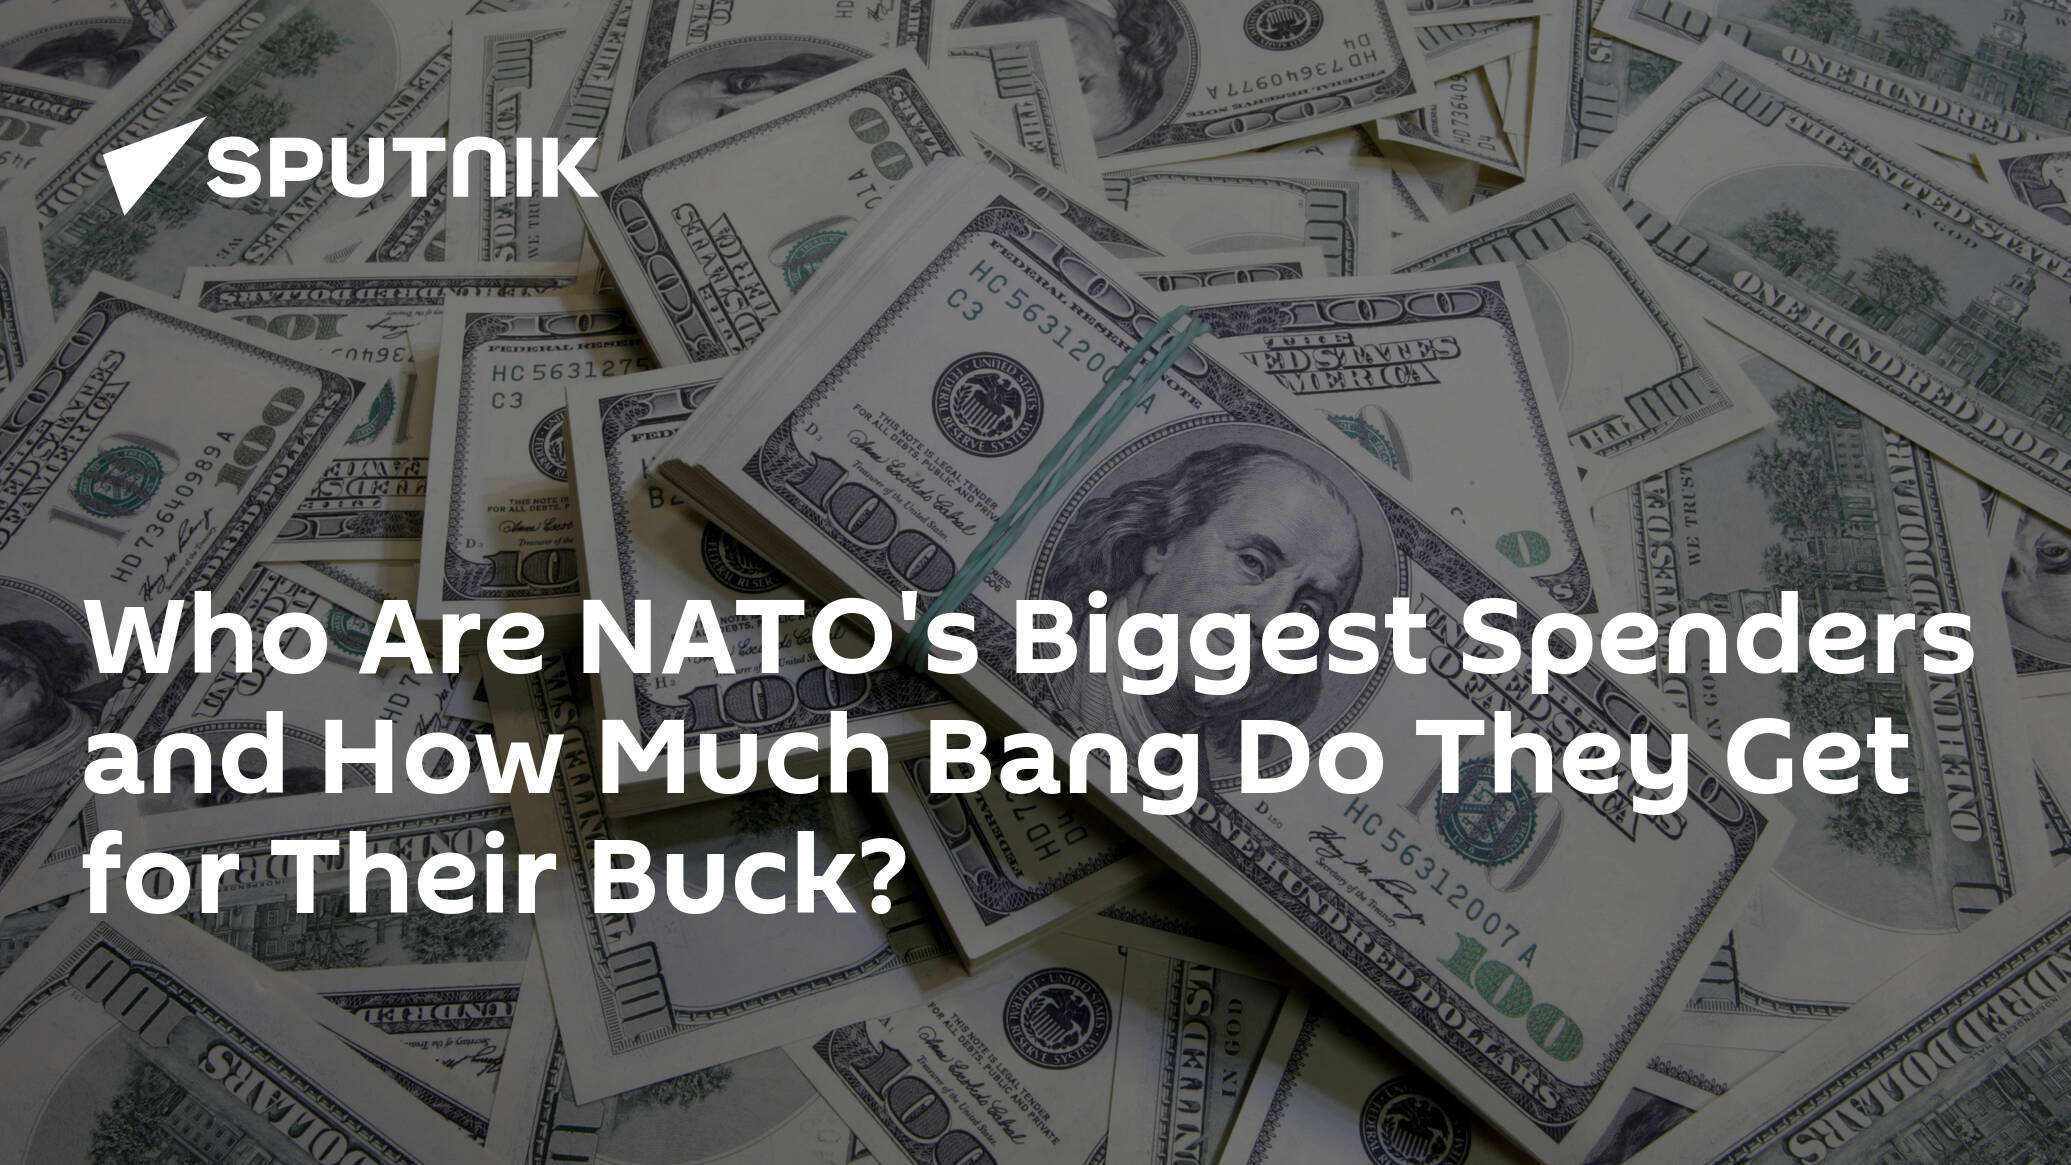 Who Are NATO's Biggest Spenders and How Much Bang Do They Get for Their Bucks?